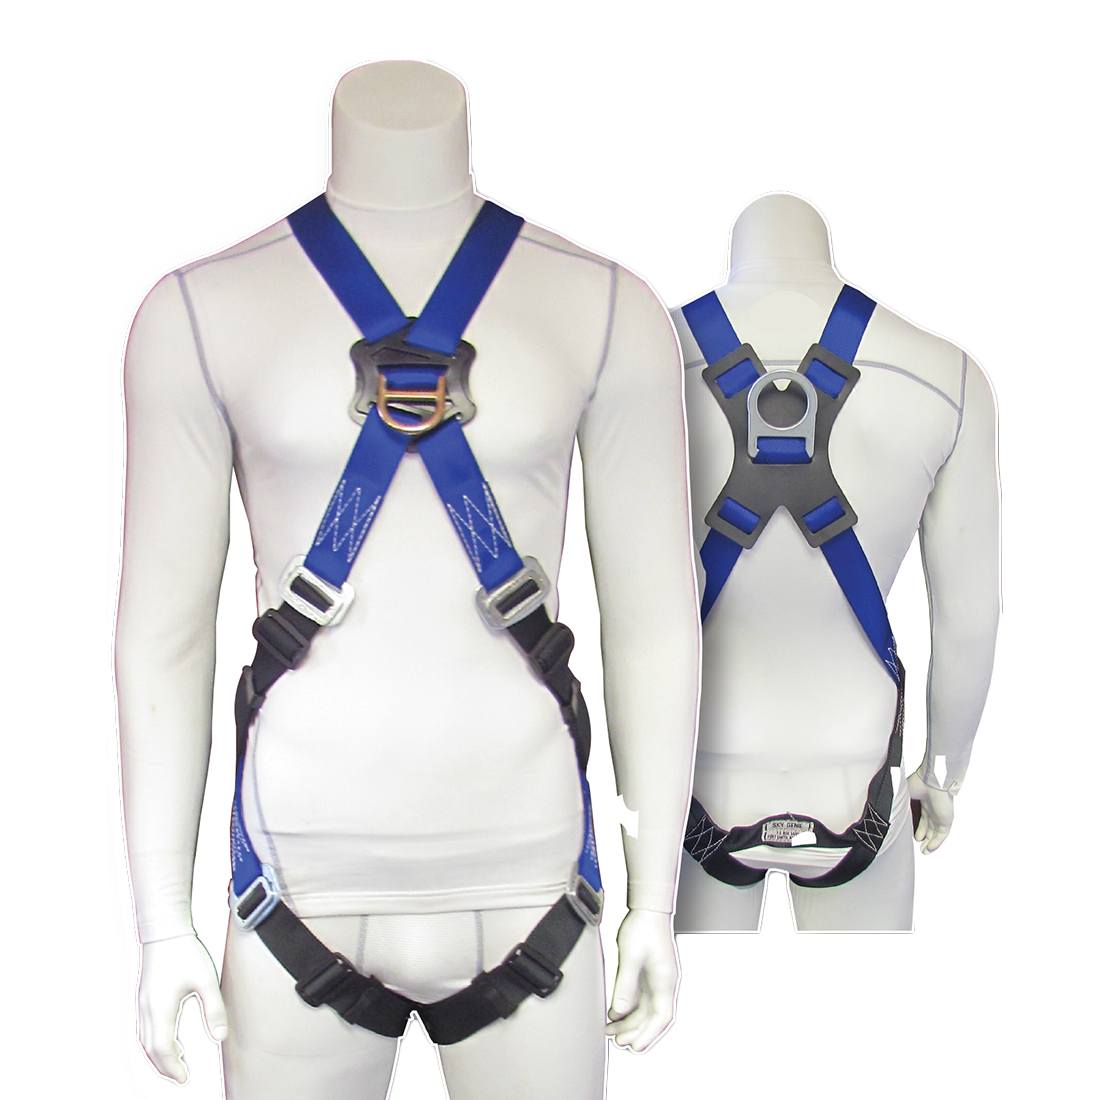 Sky Genie Full Body Helios Harness - On Mannequin - Front and Back View